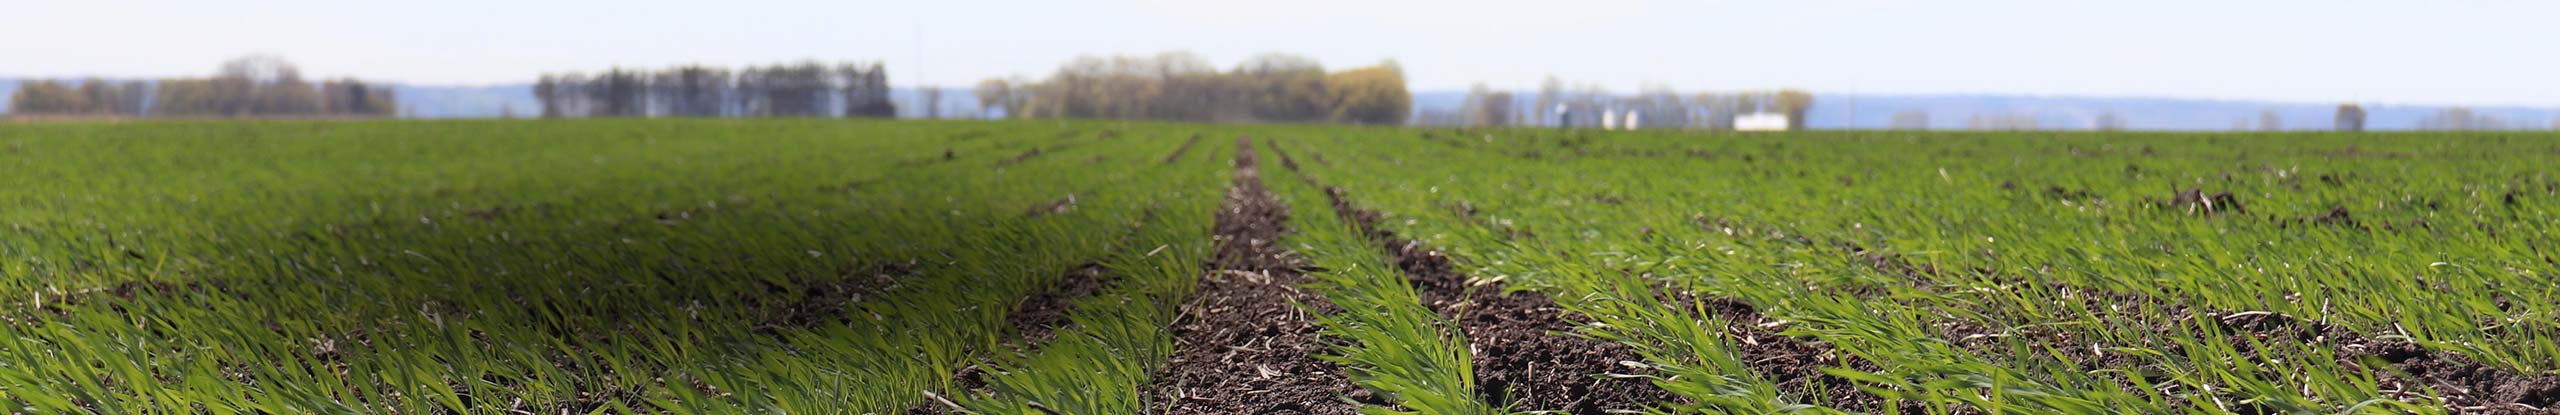 Winter Wheat: Fertility Requirements and Assessing Survival